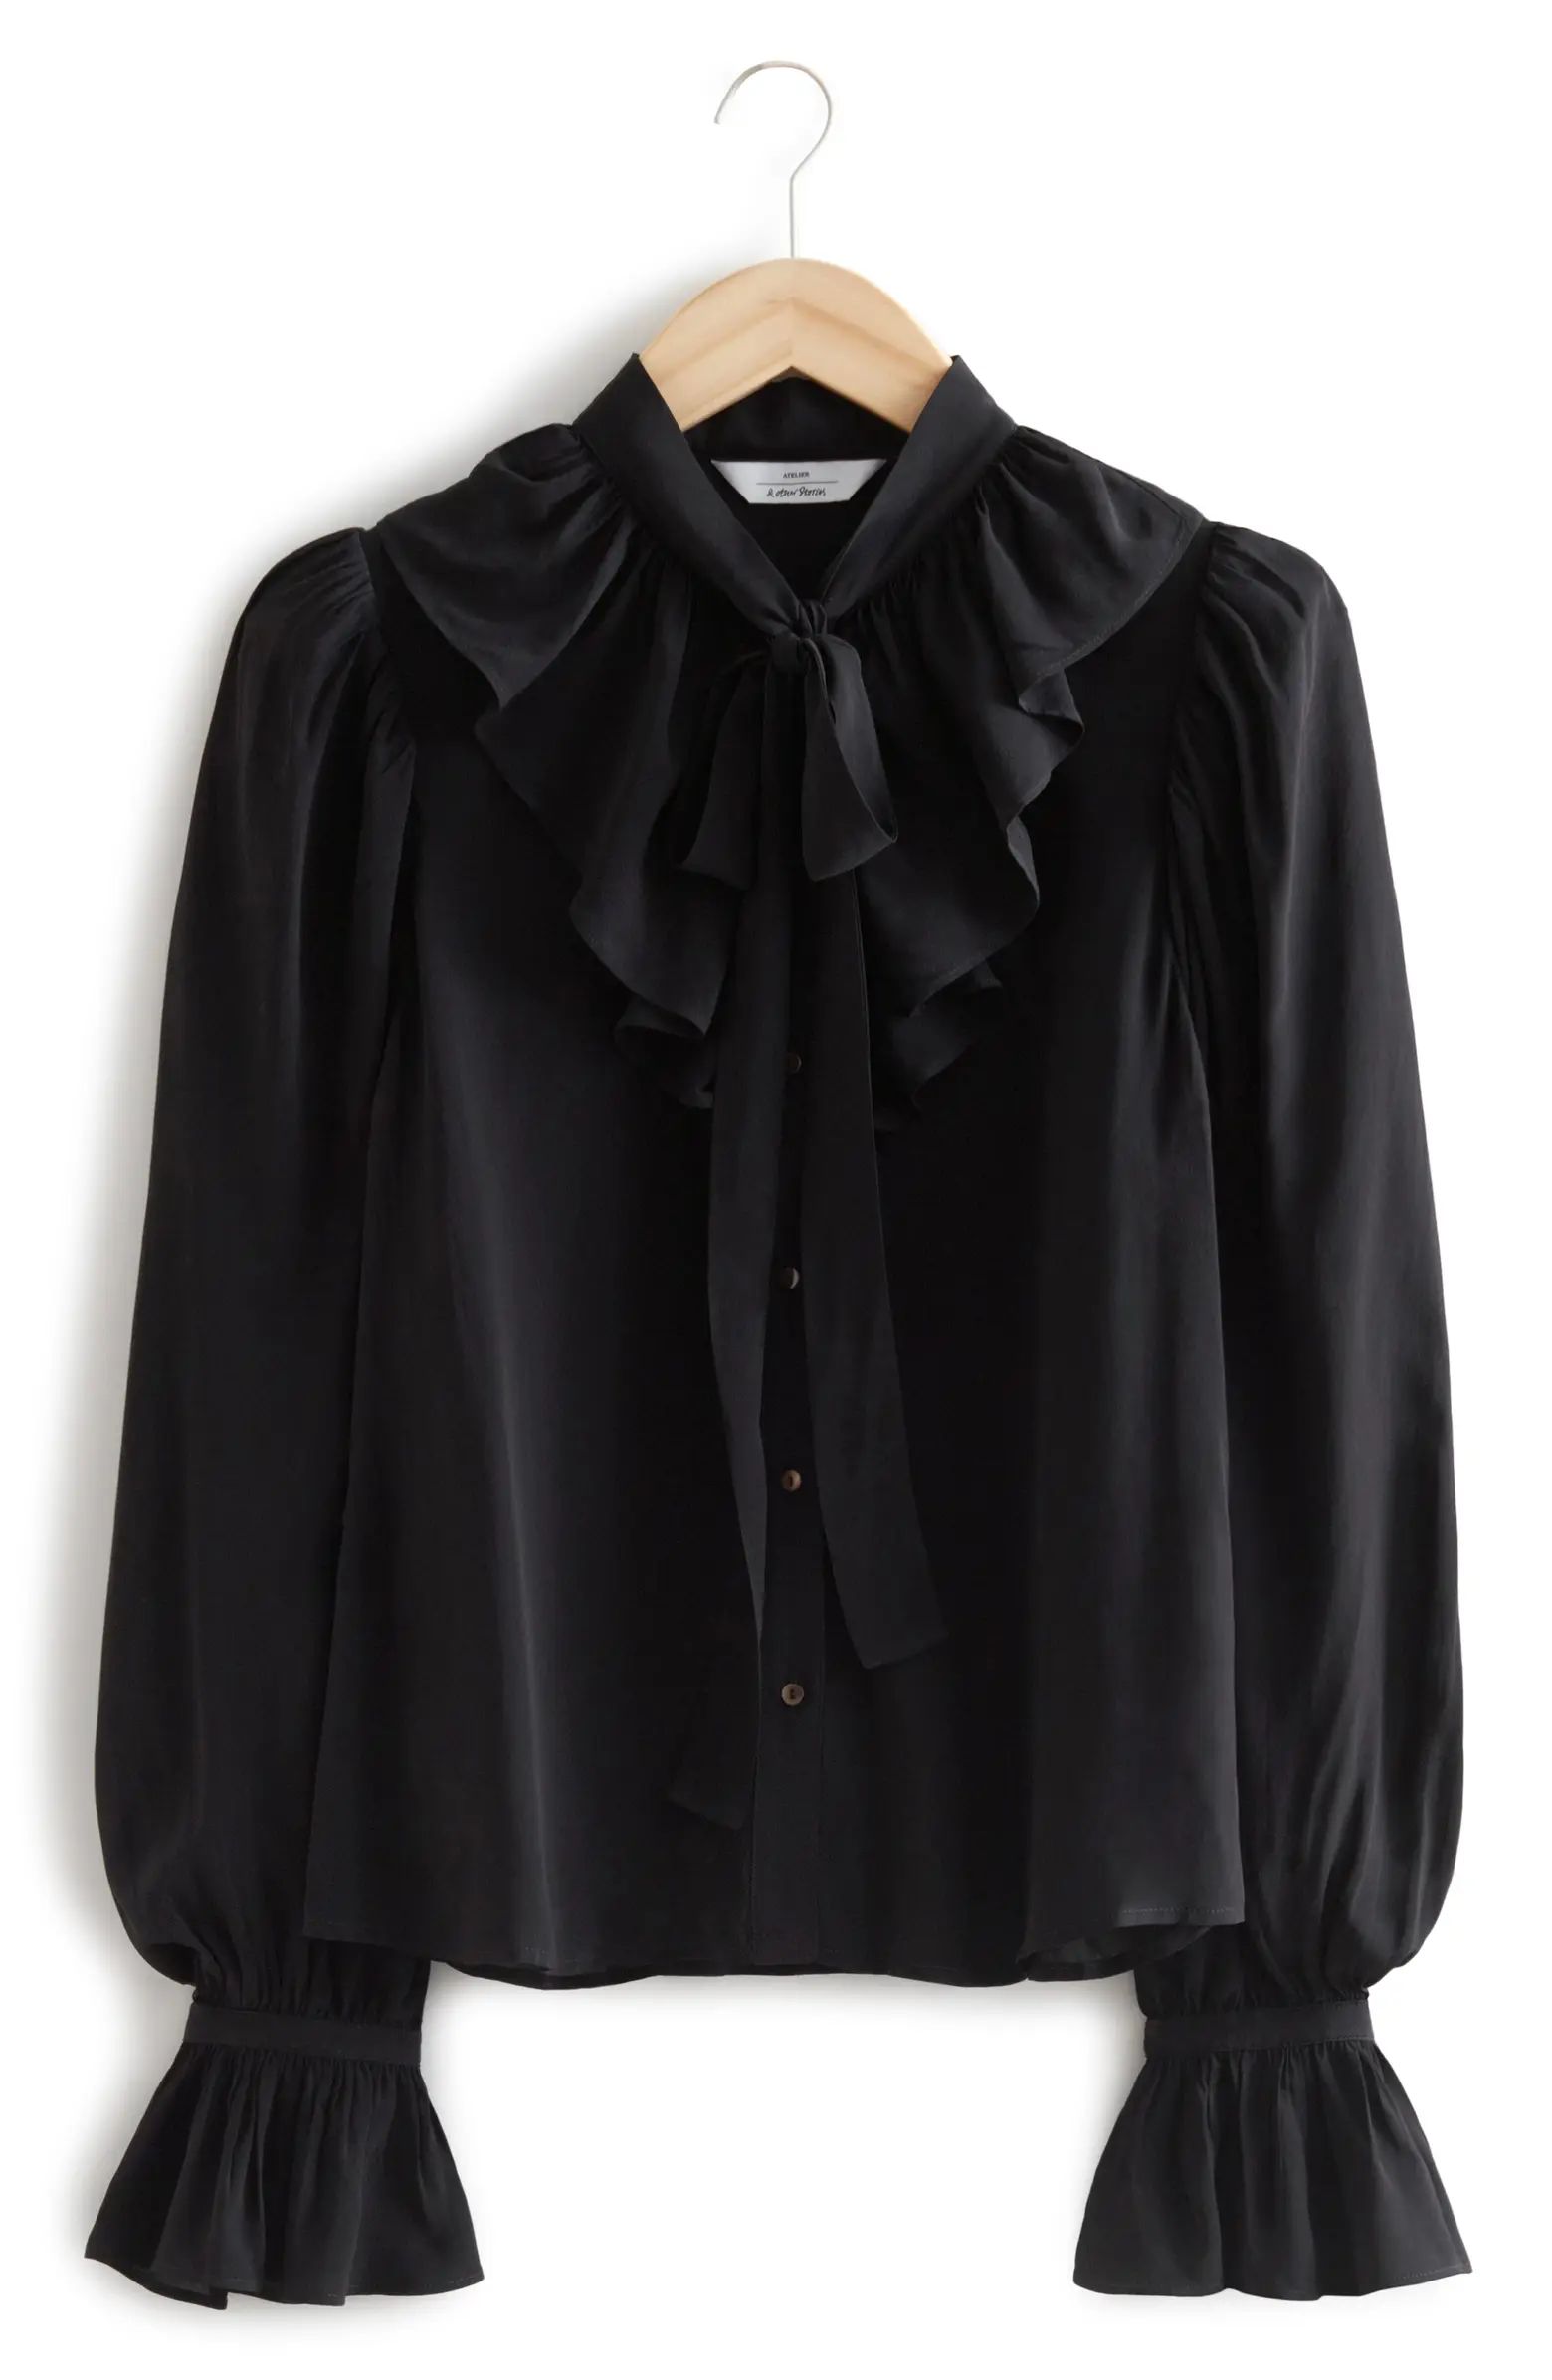 & Other Stories Ruffle Tie Neck Blouse | Nordstrom | Nordstrom